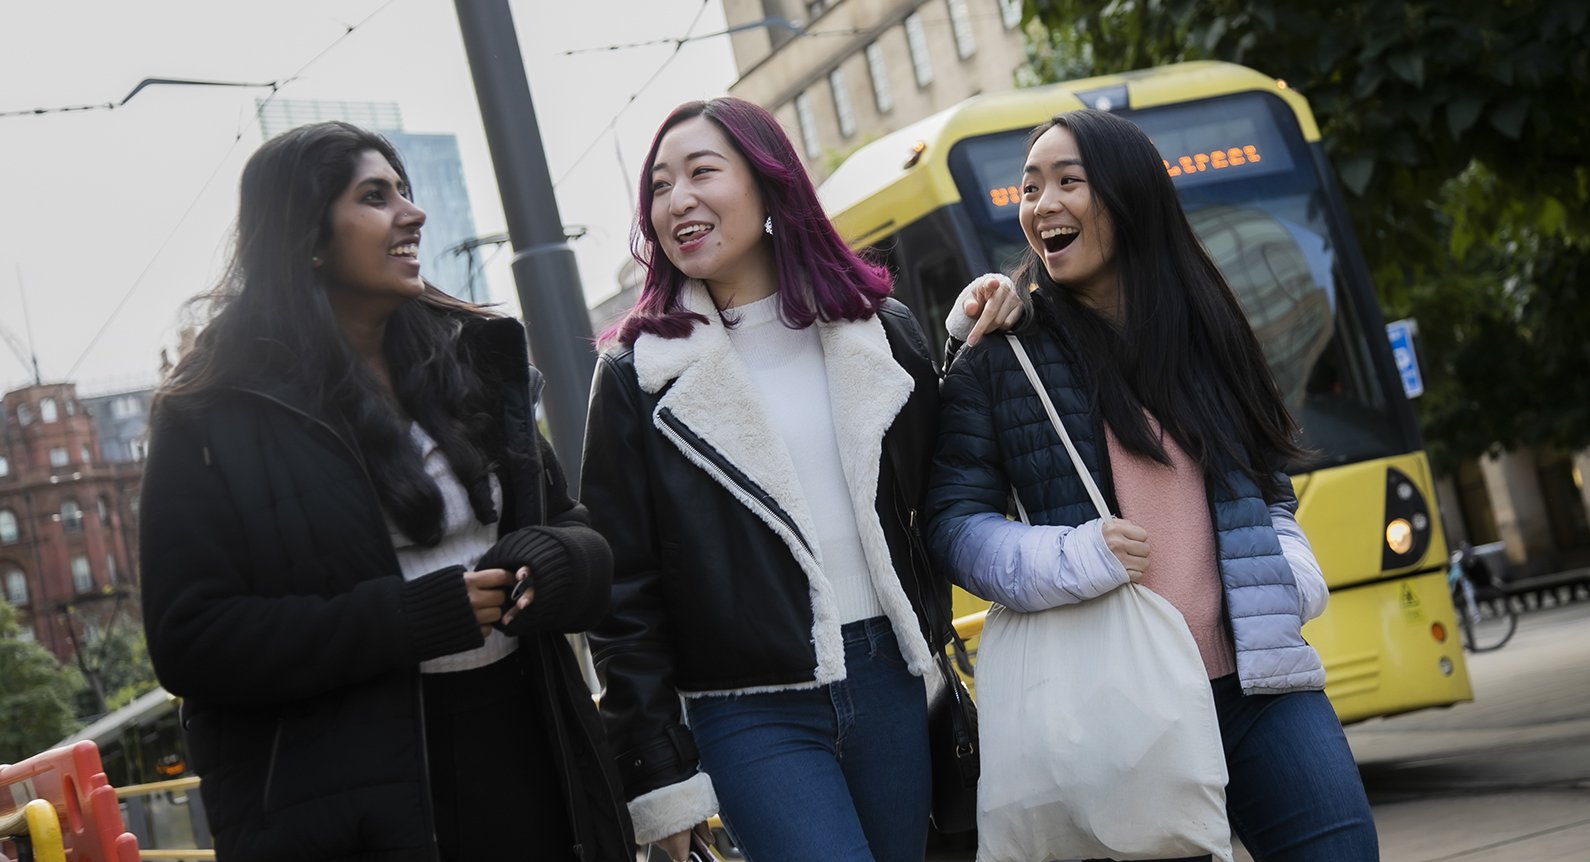 Young women laughing and having fun in the city